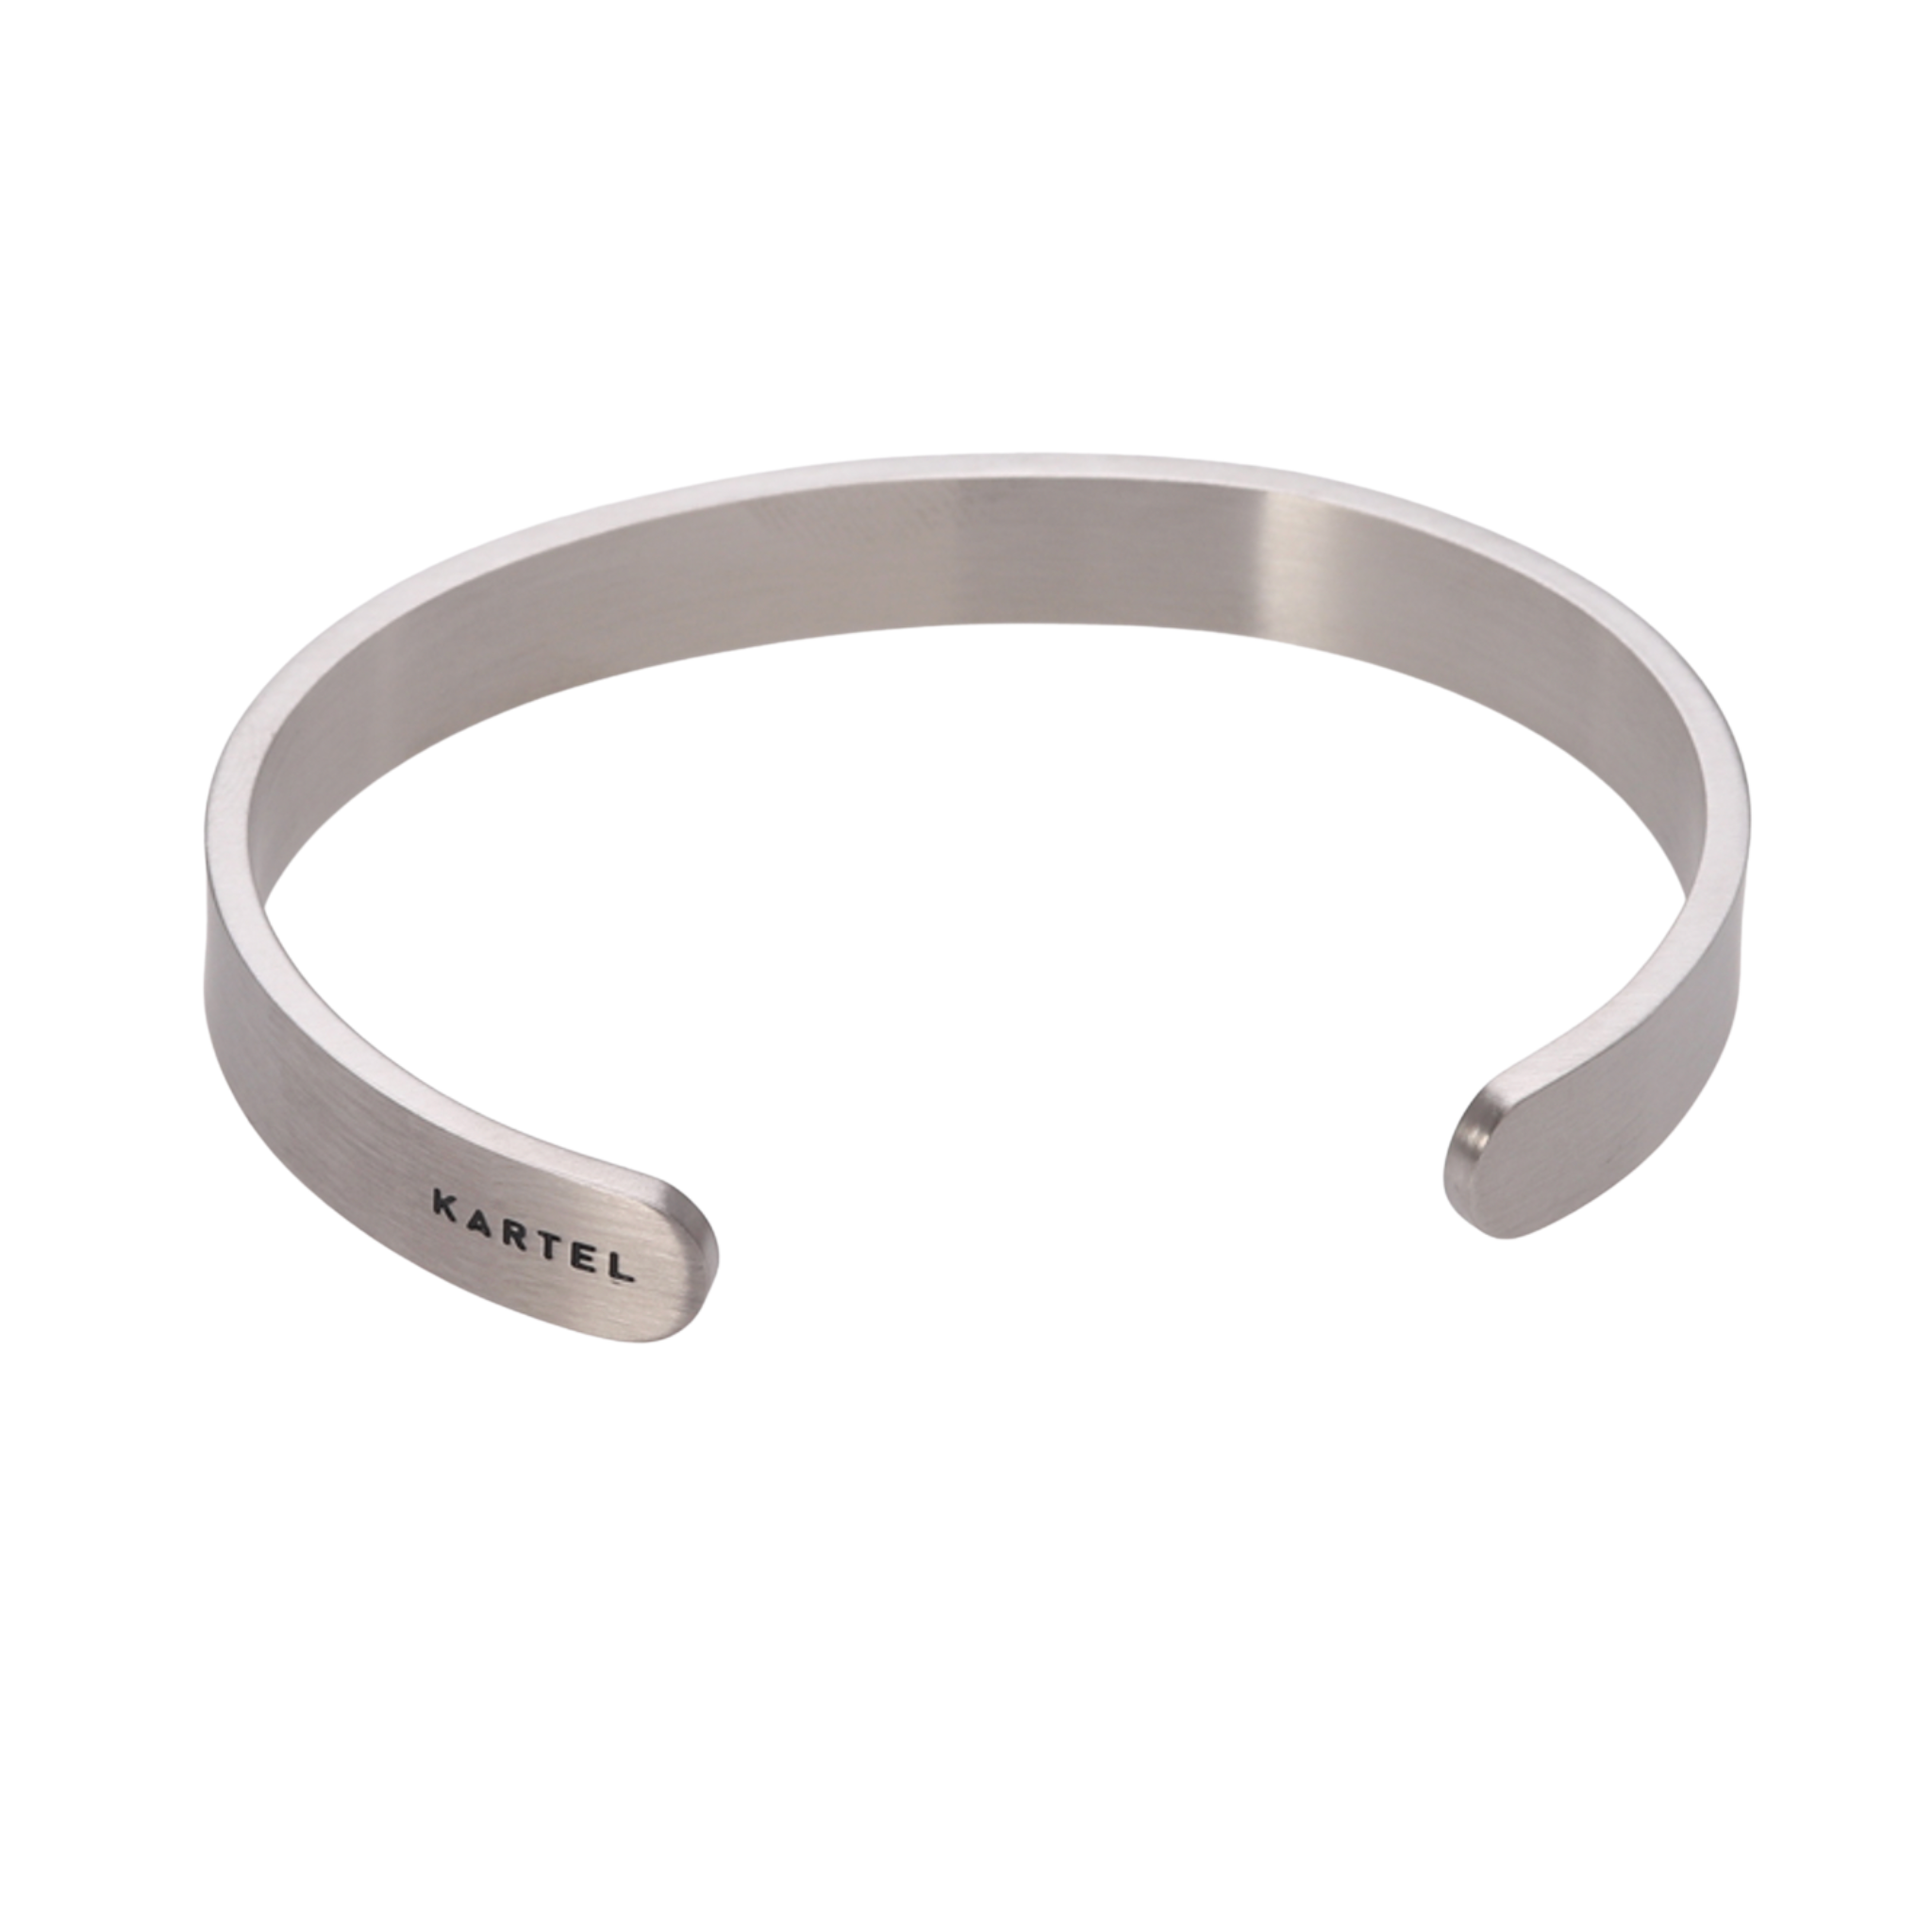 Brushed Stainless Steel Cuff - 4 Sizes